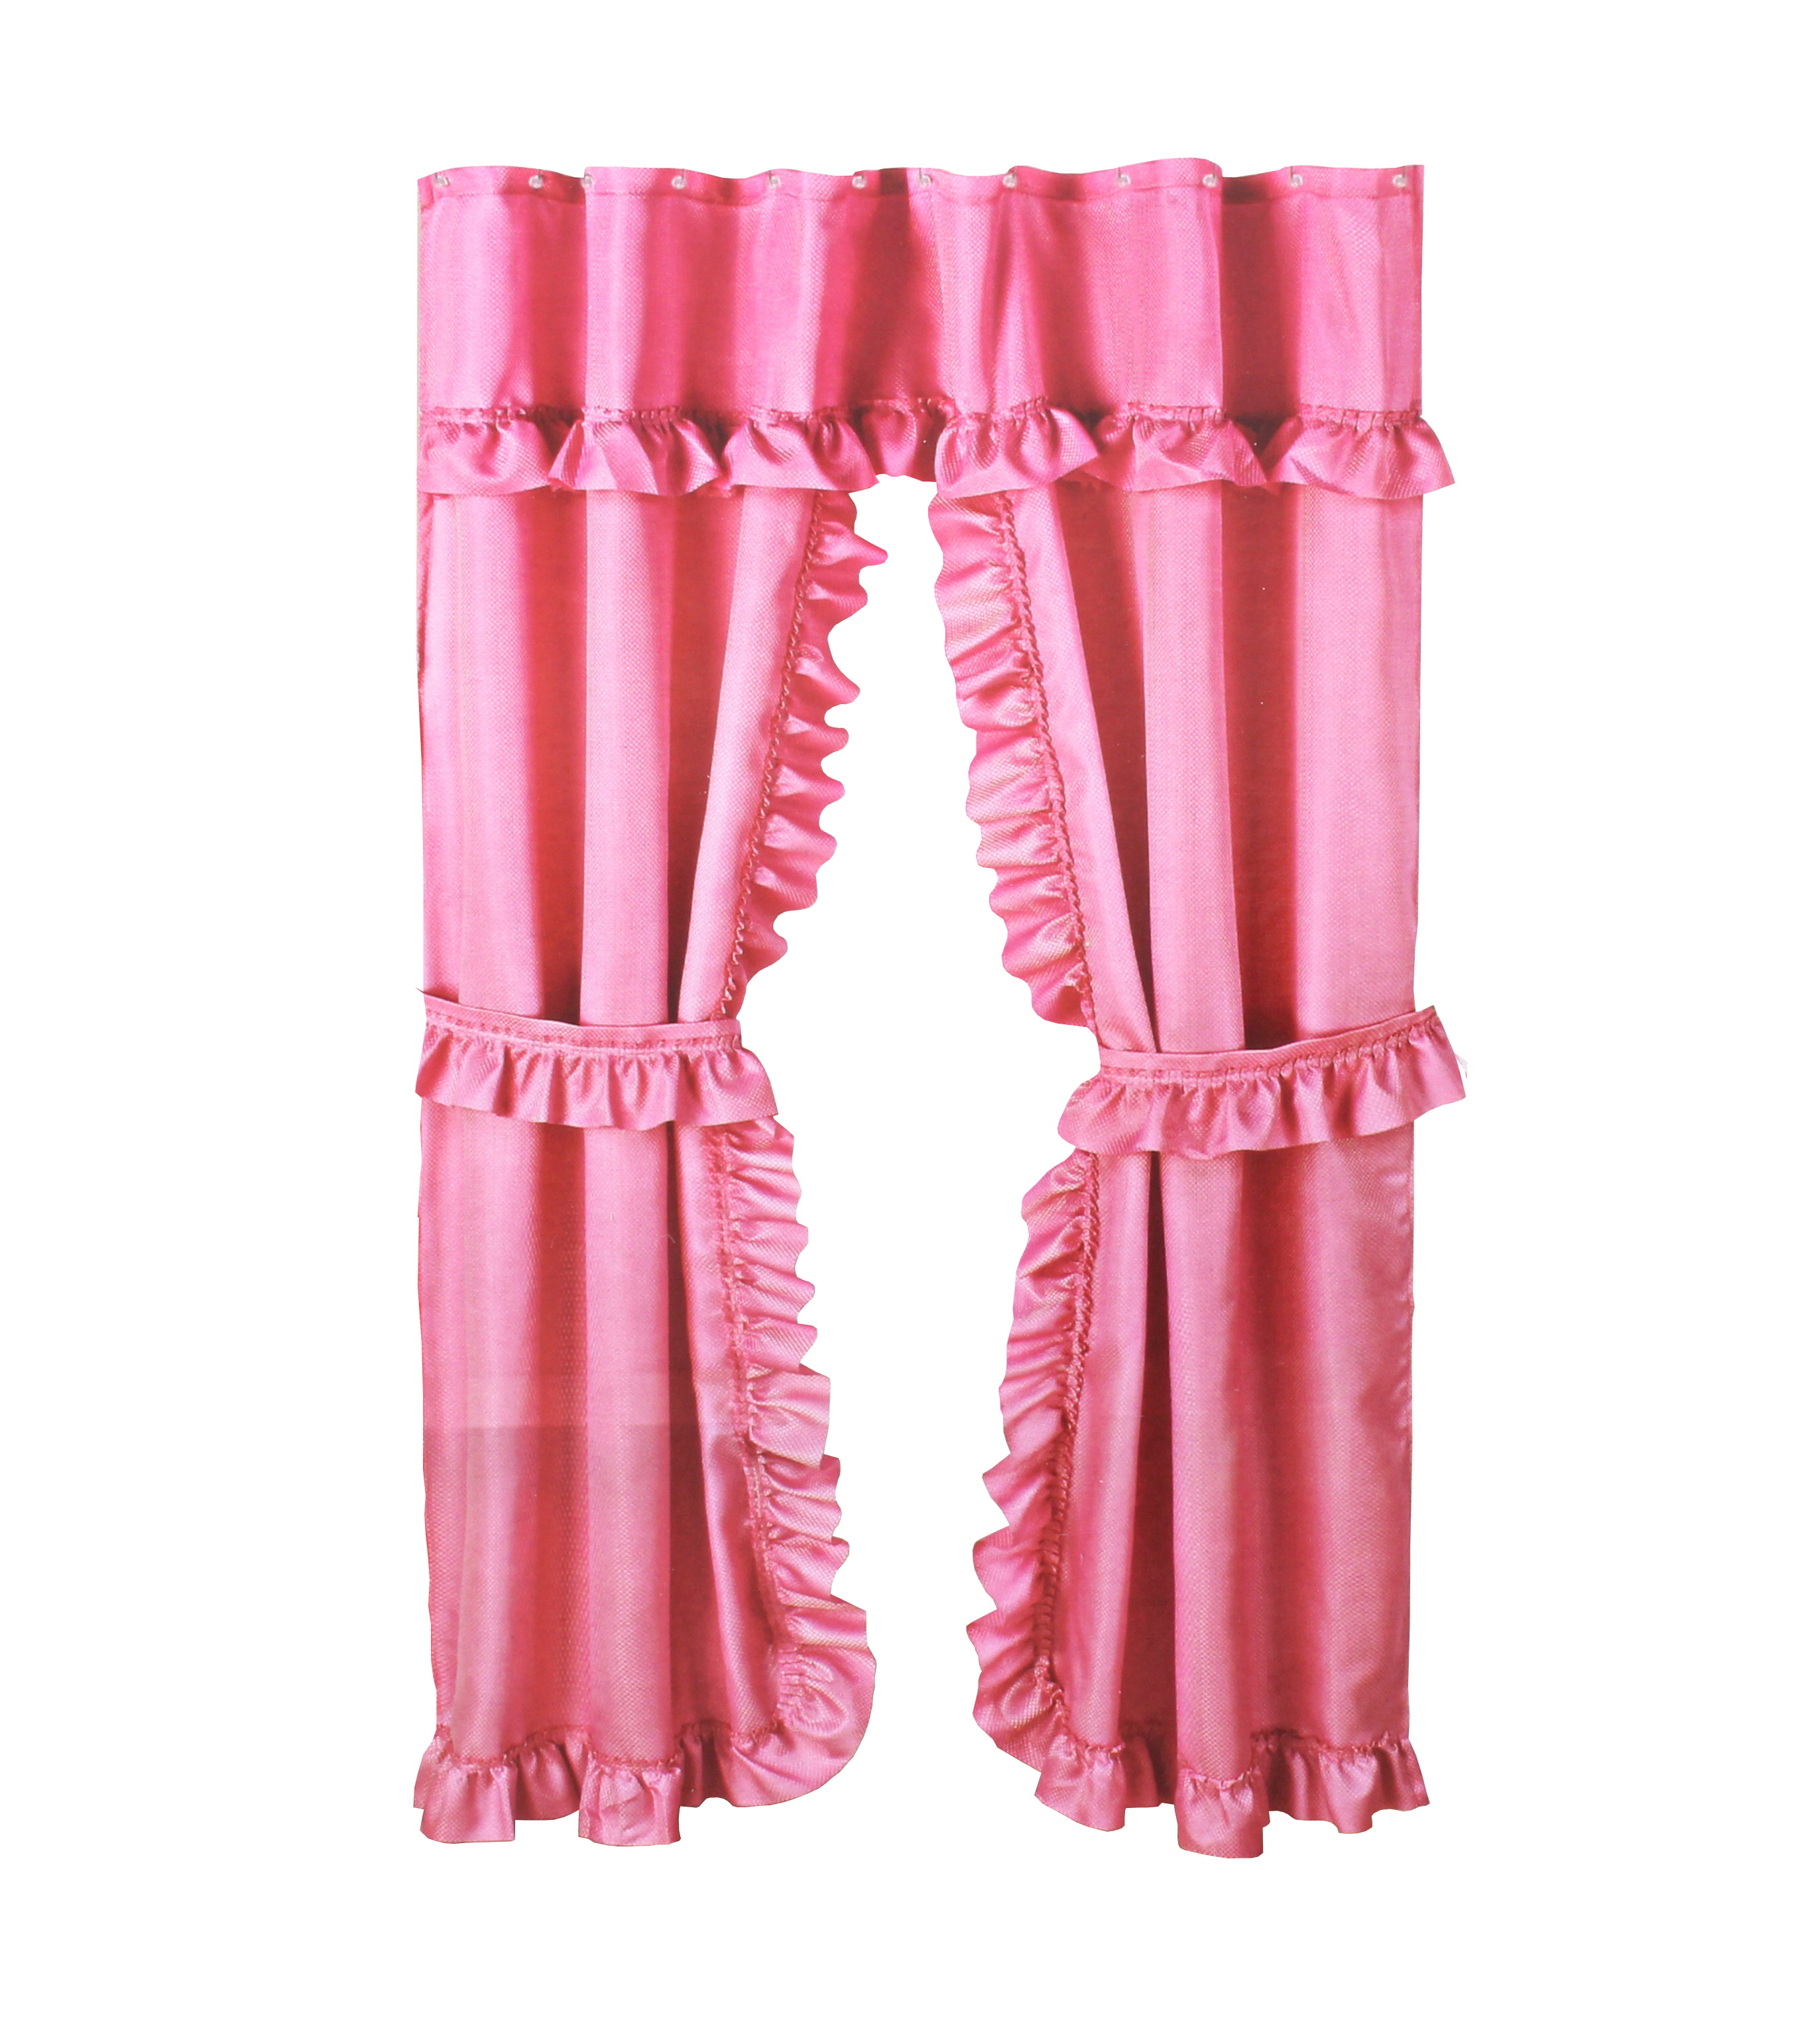 Better Home Pink Ruffled Double Swag Shower Curtain & Liner 70" x 72" w/12 Roller Rings